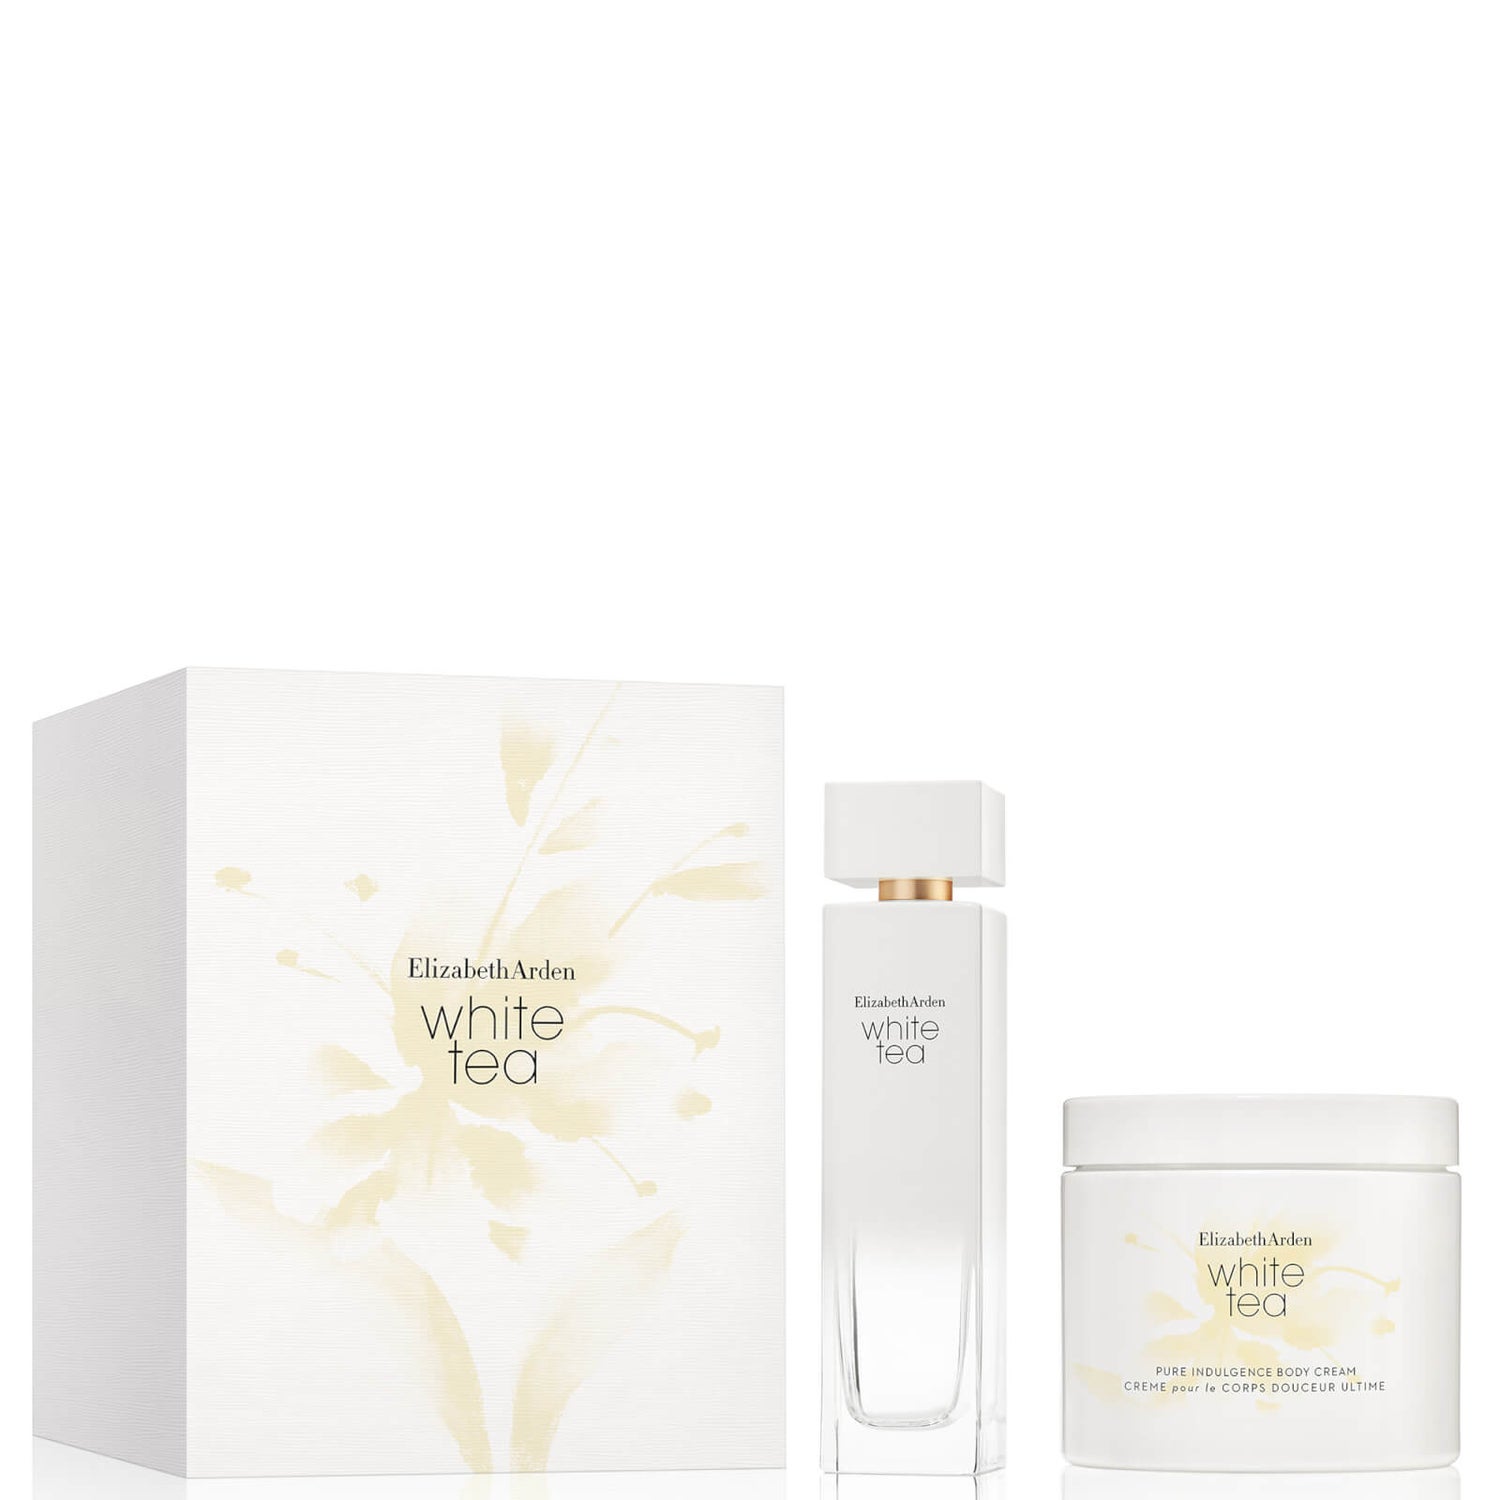 Hudson's Bay Canada Freebie: Free 4 Piece Elizabeth Arden Prevage Gift With  Purchase - Canadian Freebies, Coupons, Deals, Bargains, Flyers, Contests Canada  Canadian Freebies, Coupons, Deals, Bargains, Flyers, Contests Canada